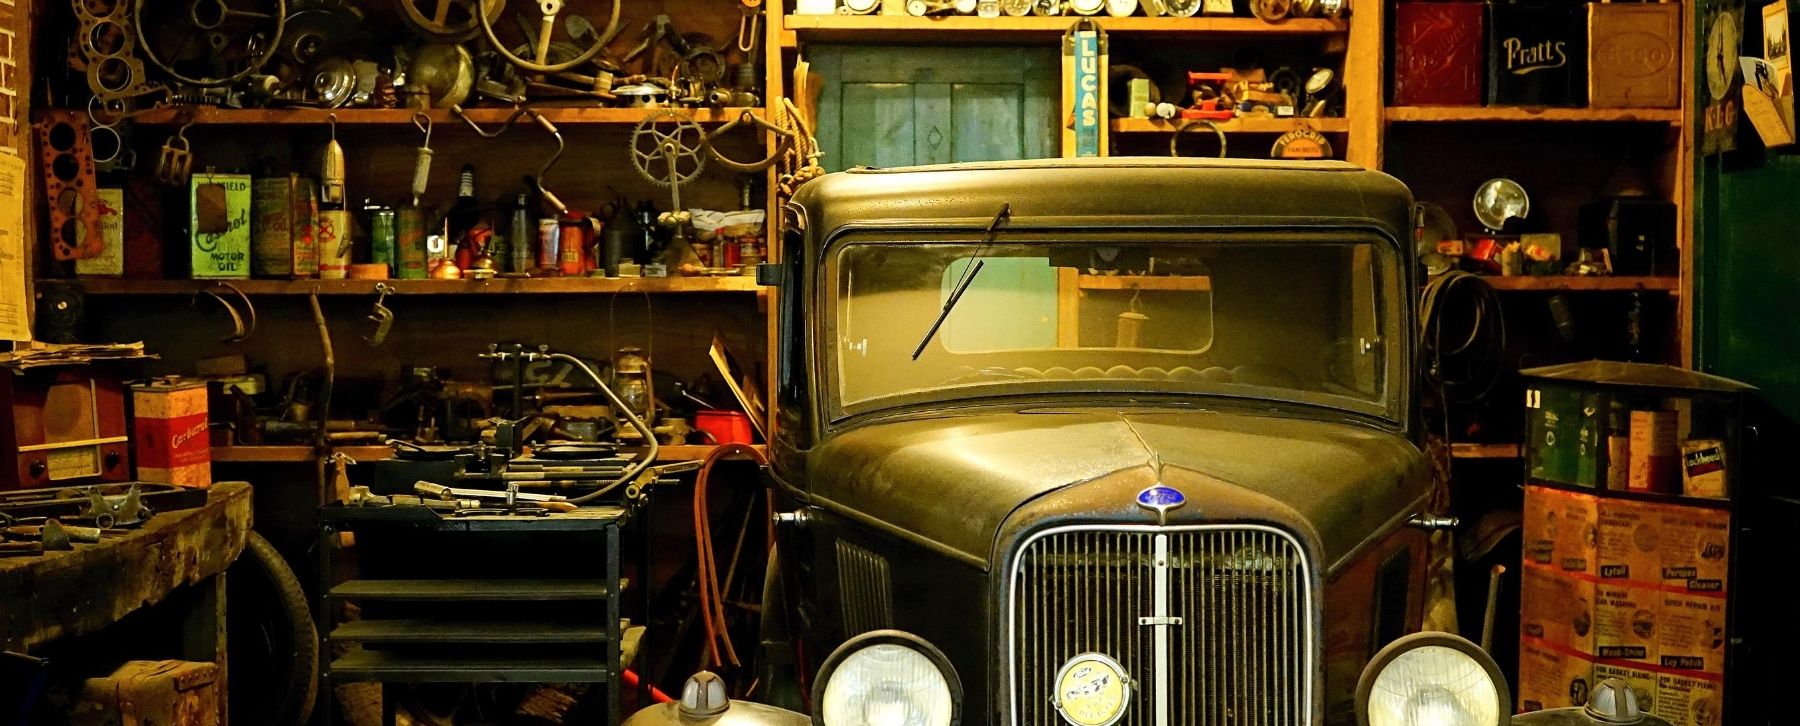 TIPS AND TRICKS FOR YOUR GARAGE